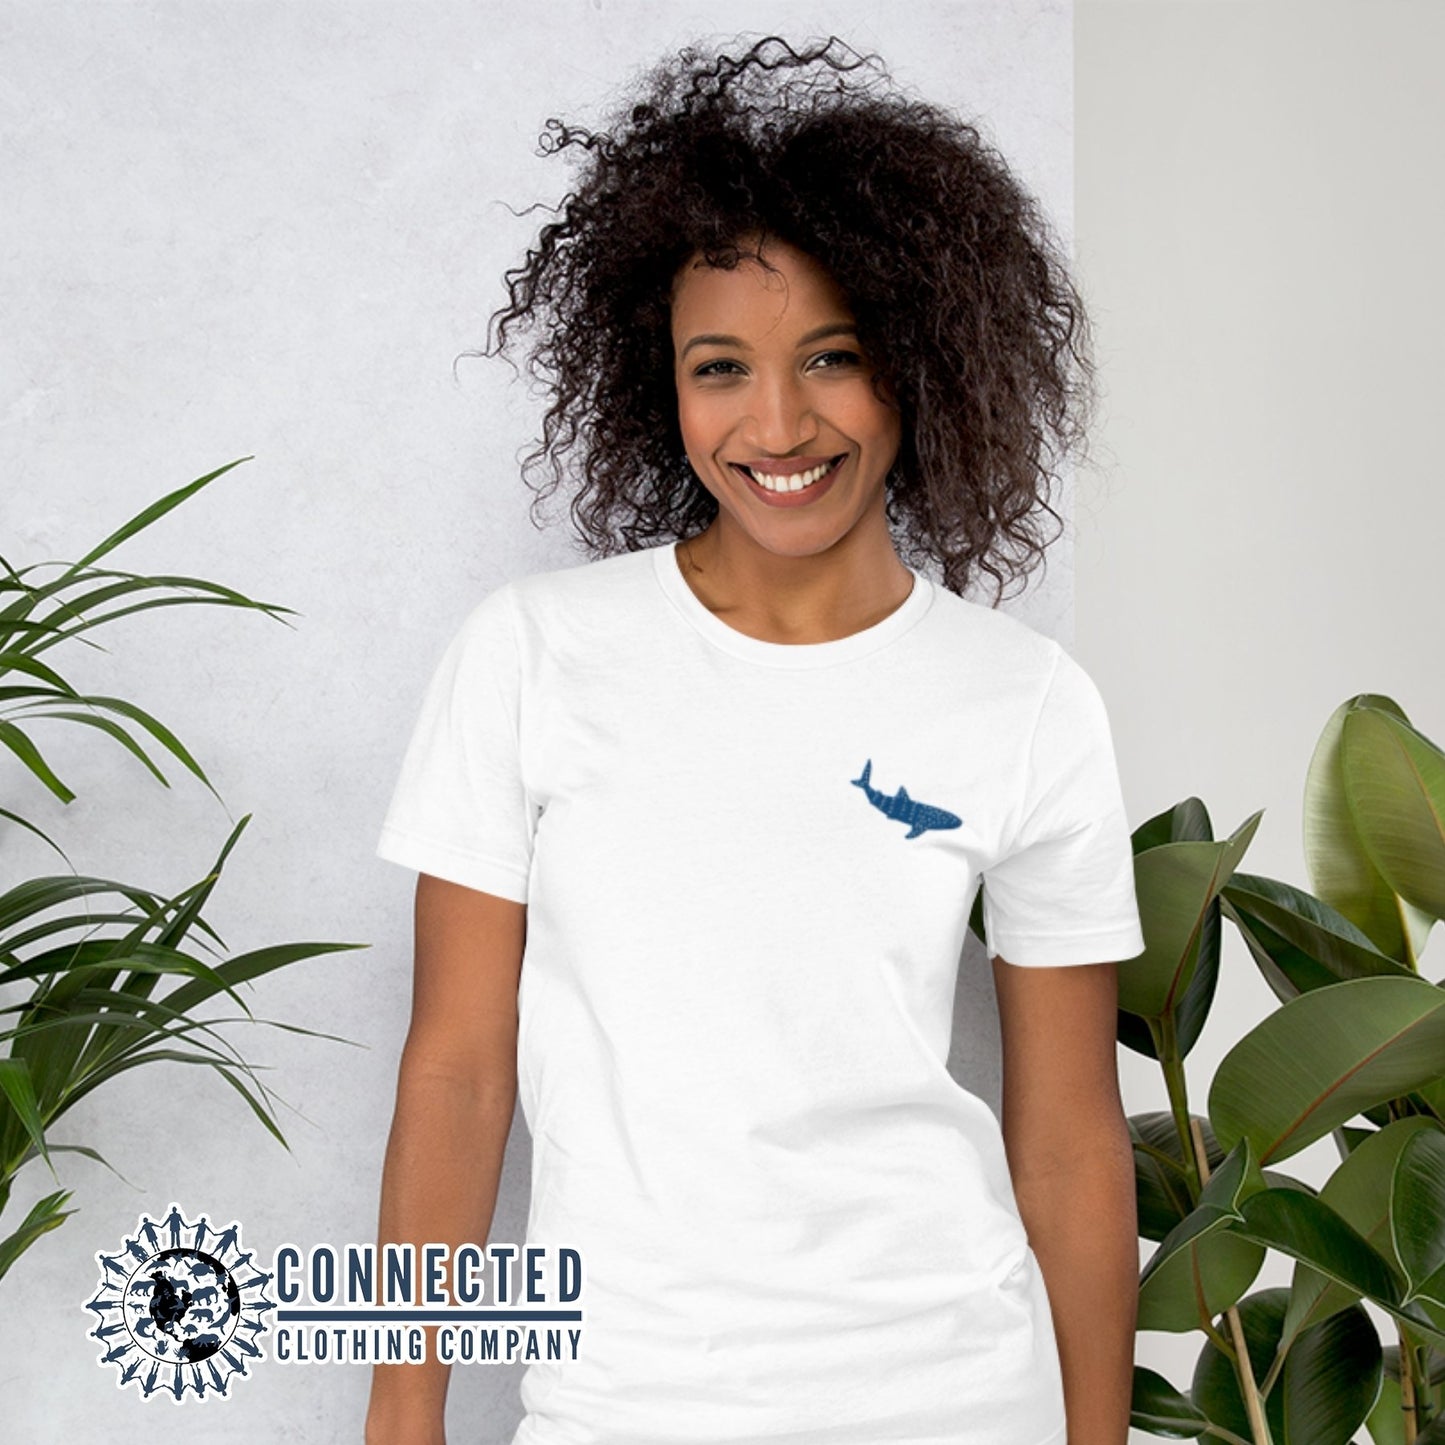 Model Wearing White Embroidered Whale Shark Short-Sleeve Shirt - Connected Clothing Company - Ethically and Sustainably Made - 10% of profits donated to shark conservation and ocean conservation